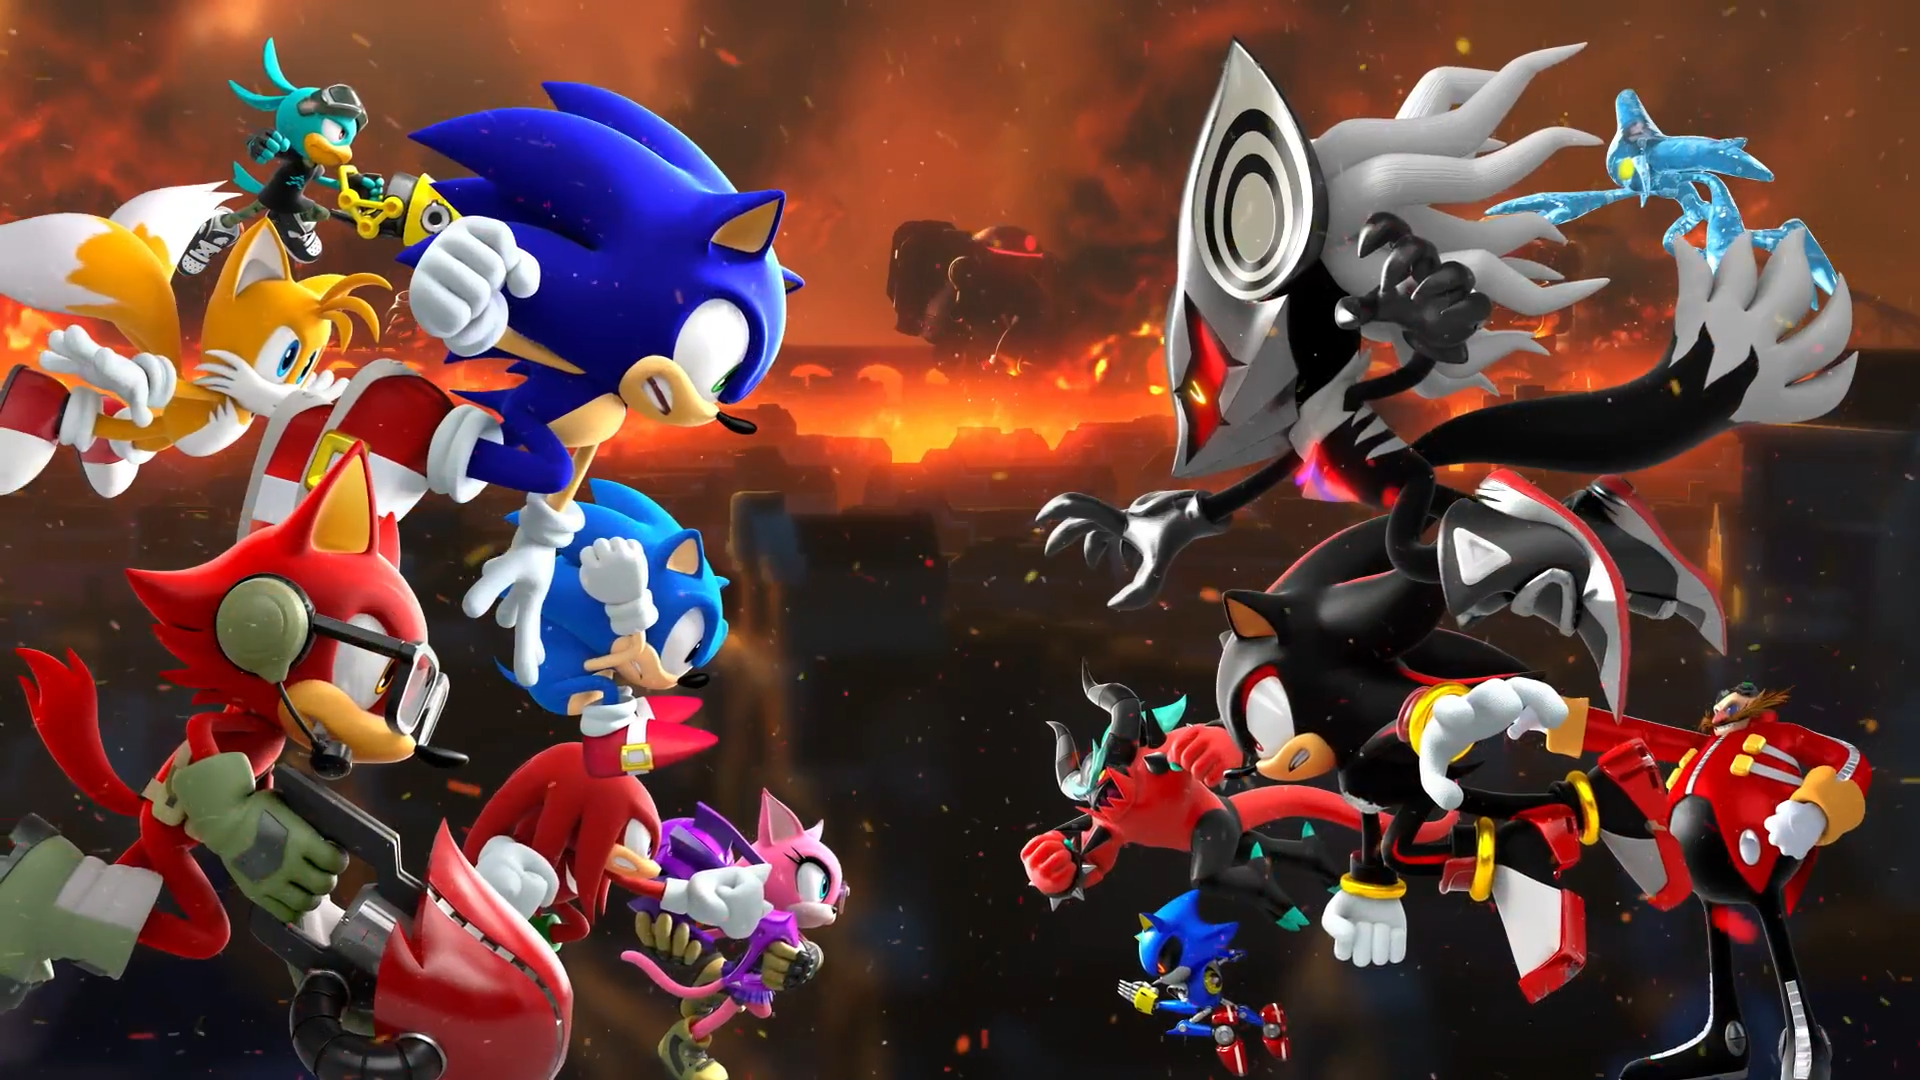 Infinite Sonic Forces Wallpapers